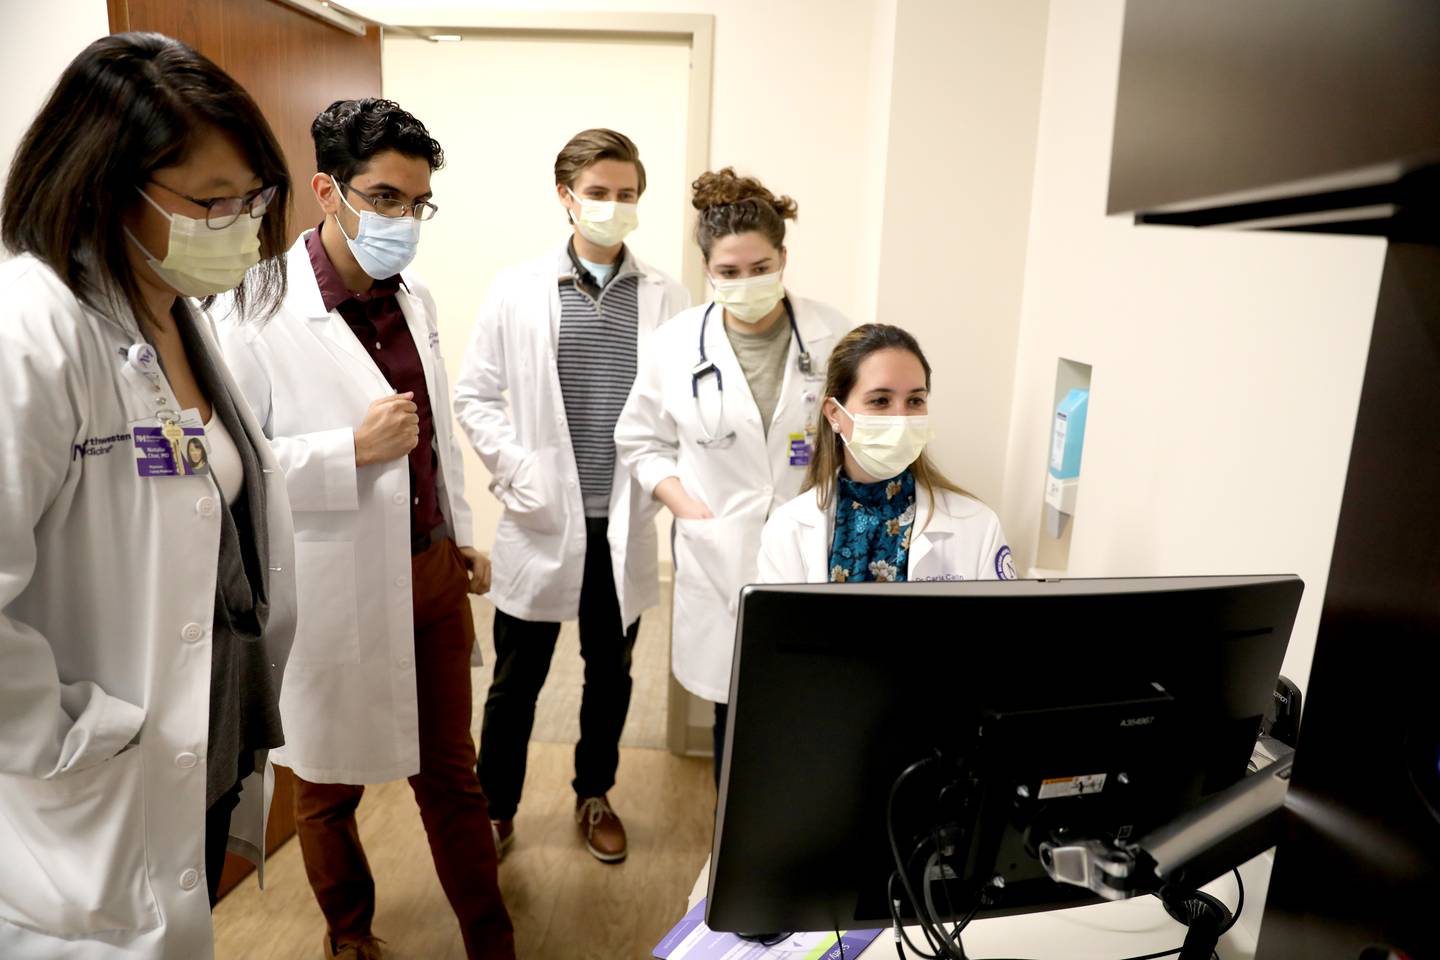 Carla Cavallin (seated), who is in her second year in the Northwestern Medicine Delnor Hospital residency program, works in a patient room of the program’s clinic with (from left) Residency Program Director Natalie Choi, residents Ameel Chaudhary, Trevor Gohl and Ischel Kelso on Thursday, Dec. 15, 2022 in Geneva.